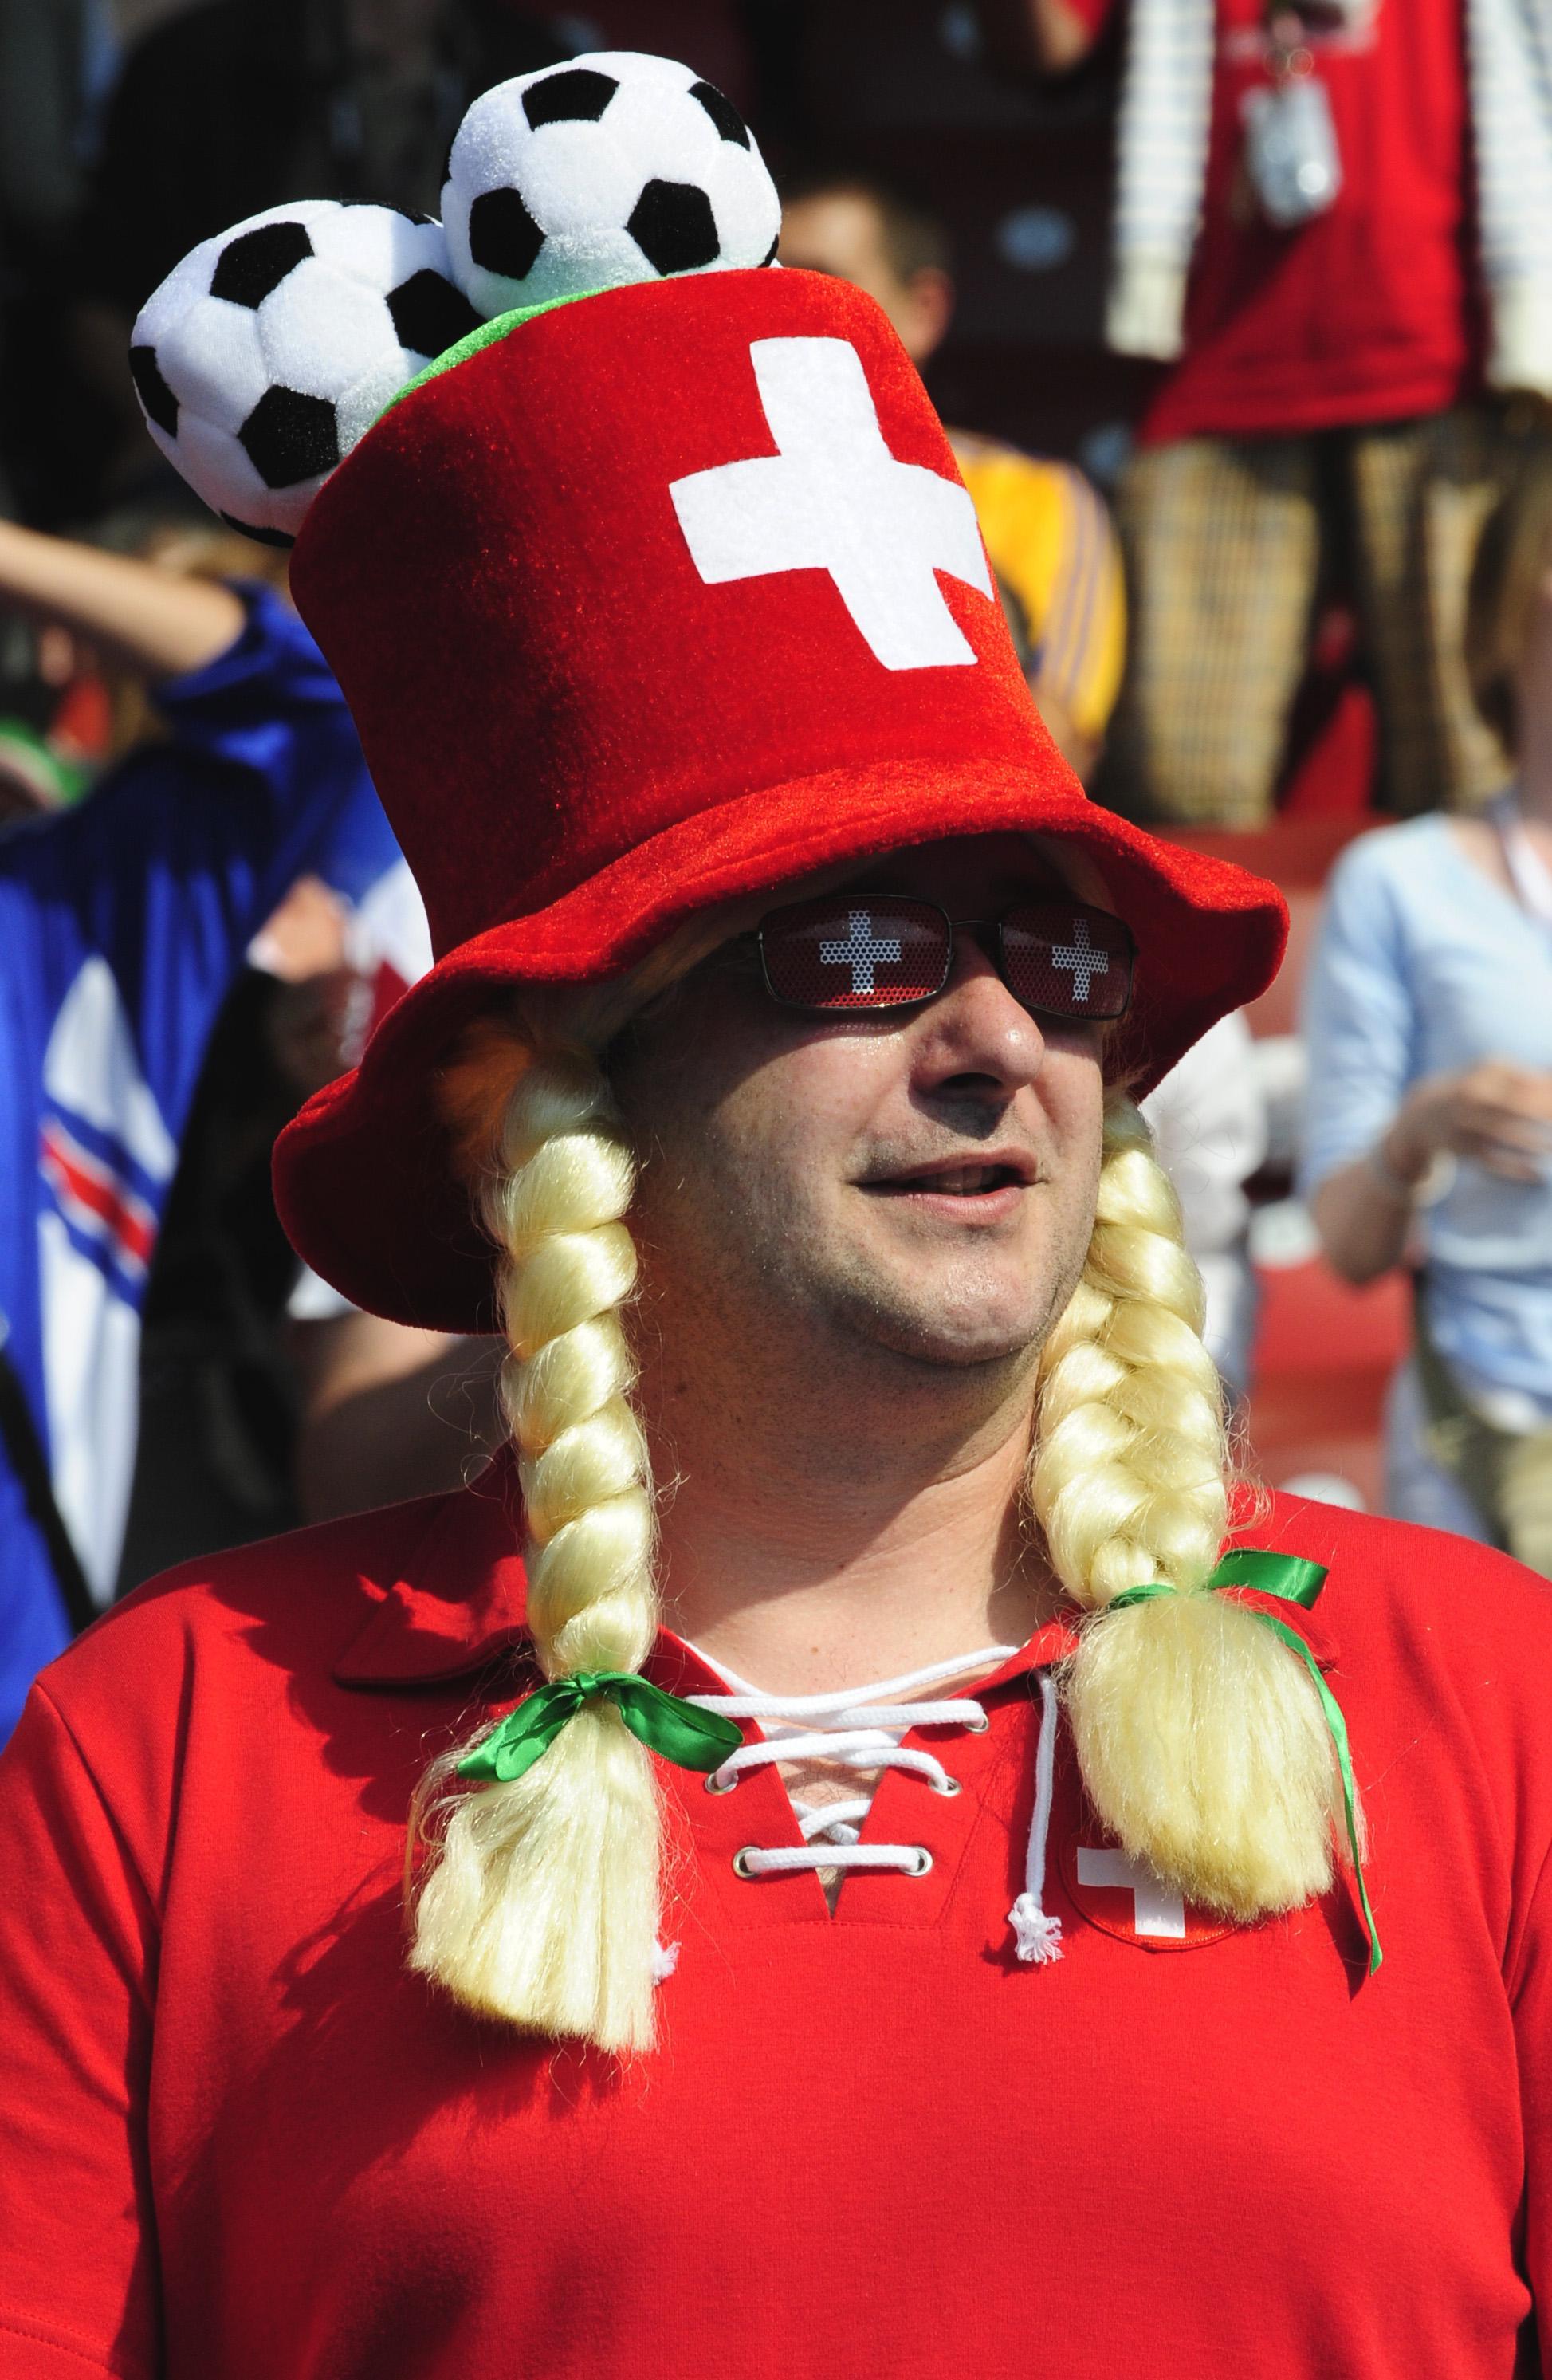 Fans at Euro 2008 soccer match